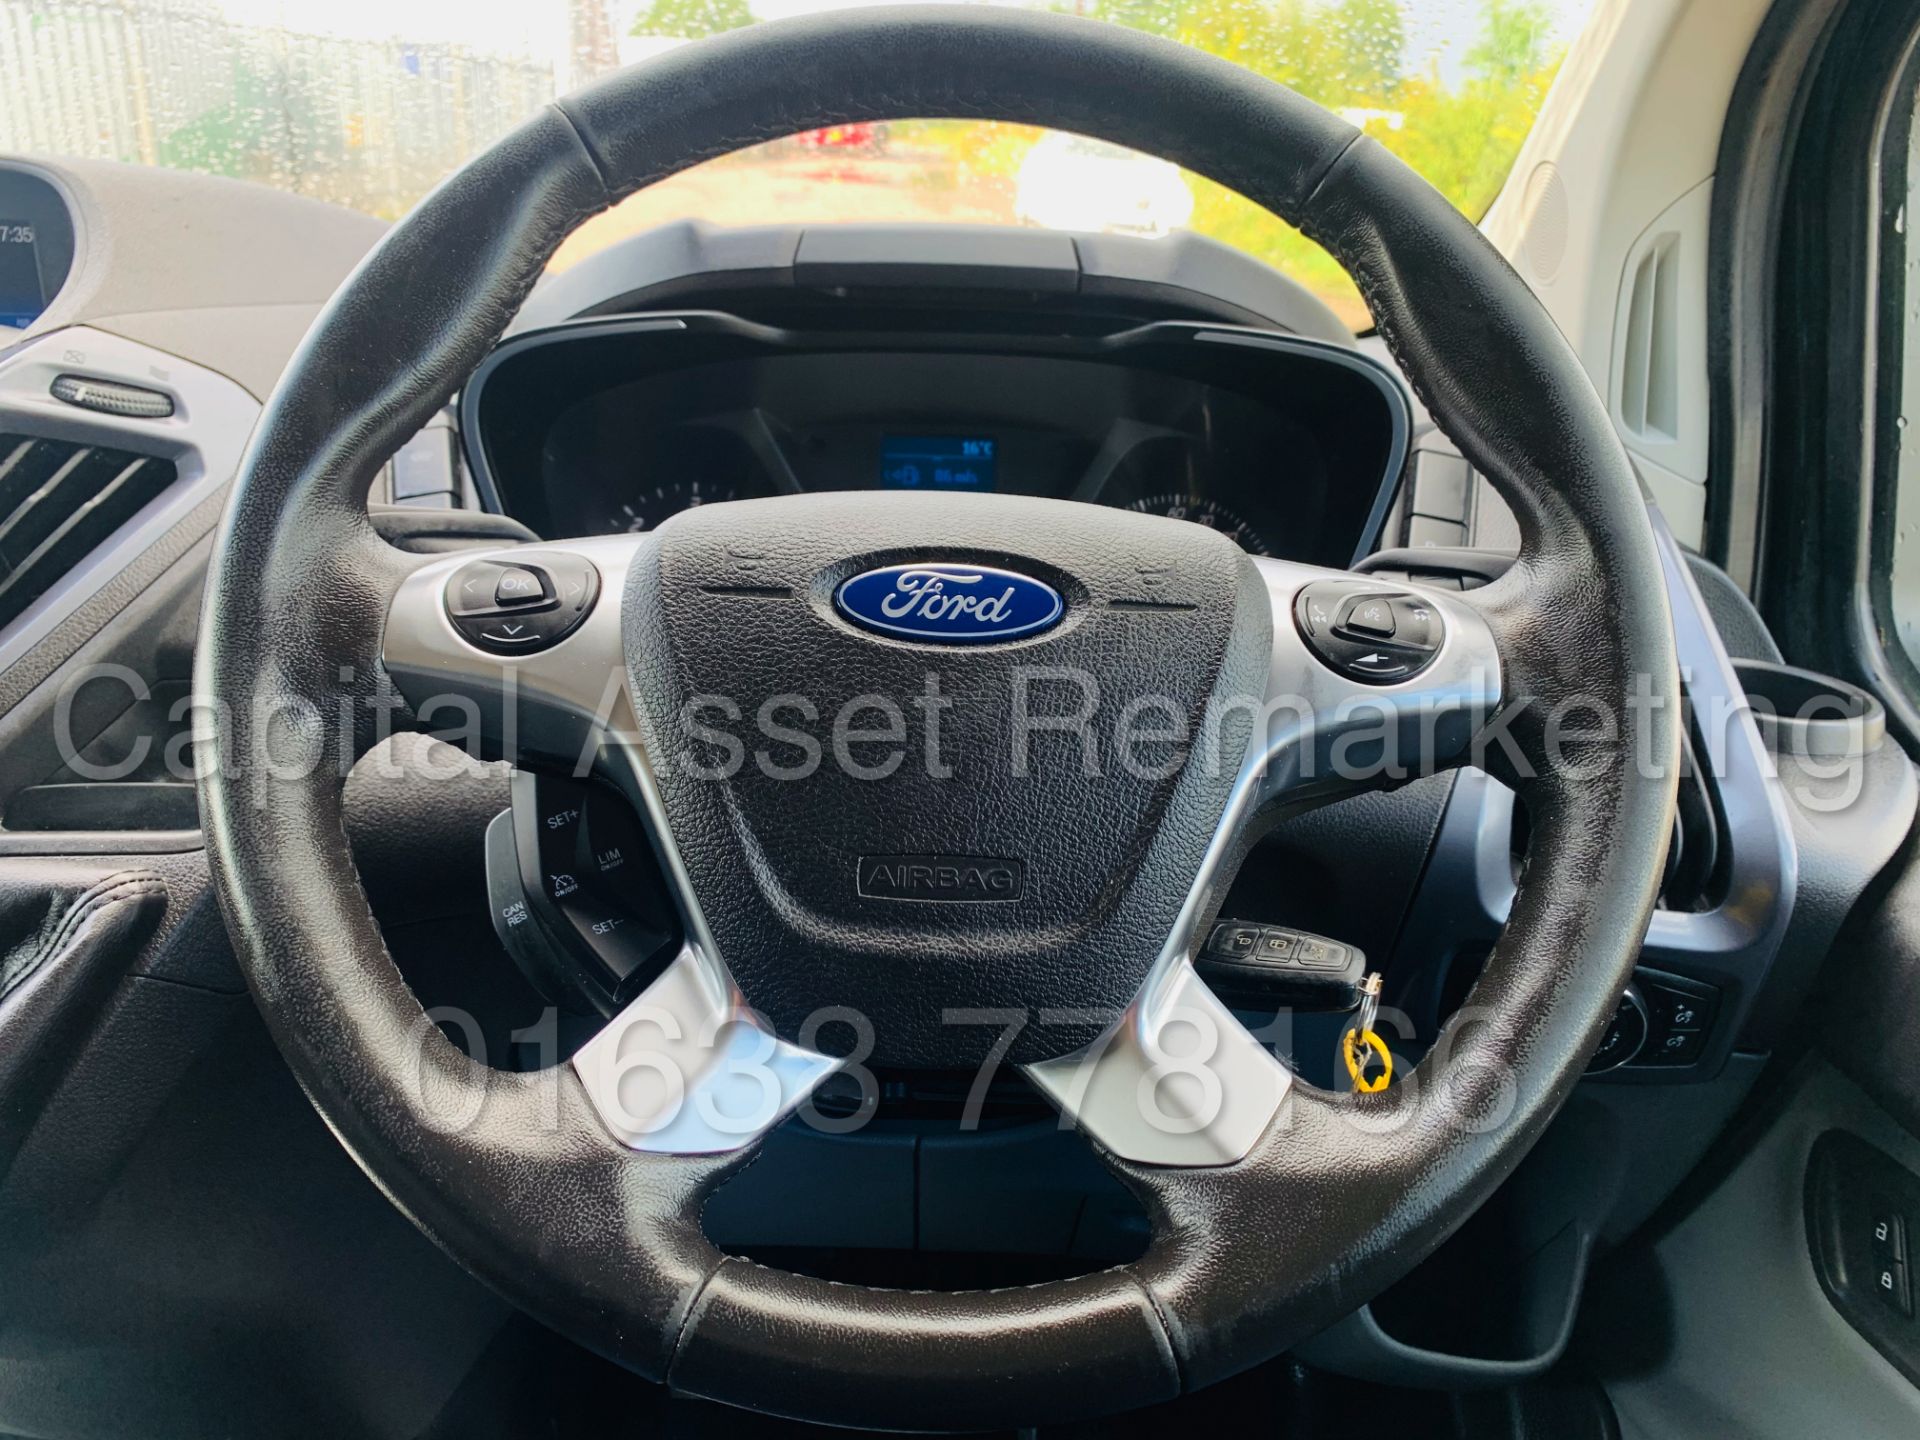 On Sale FORD TRANSIT CUSTOM *LIMITED* (2018 - EURO 6) '2.0 TDCI - 130 BHP - 6 SPEED' **LOW MILES** - Image 42 of 44